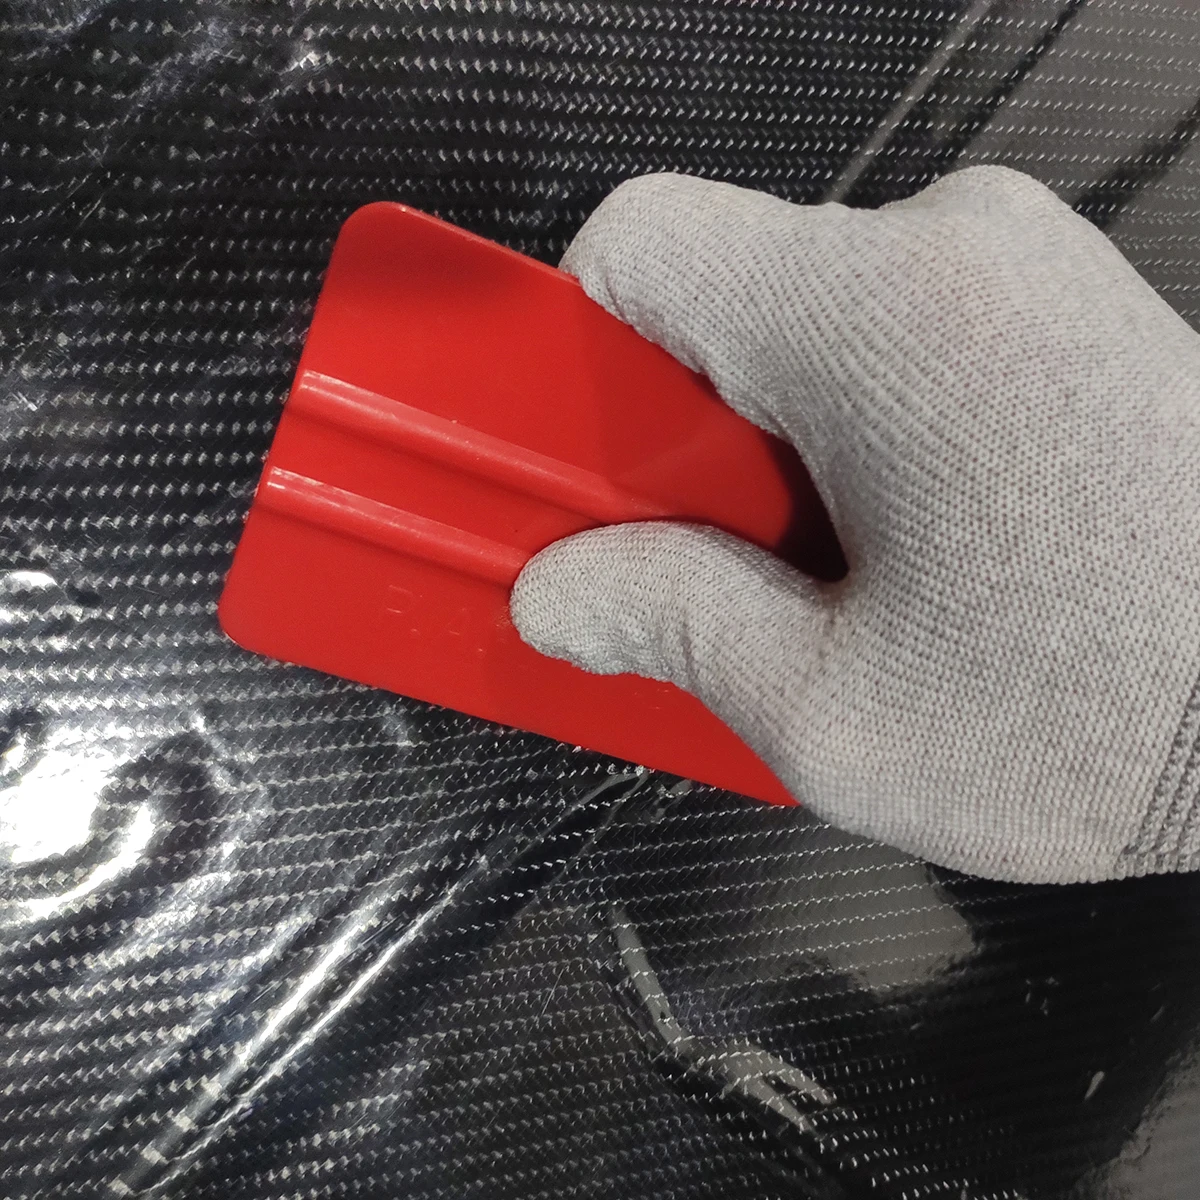 6pcs Red Plastic Vinyl Car Wrap Squeegee 3m Stick Wrapping Squeegee Window Tint Tools Manufacturing 6A76